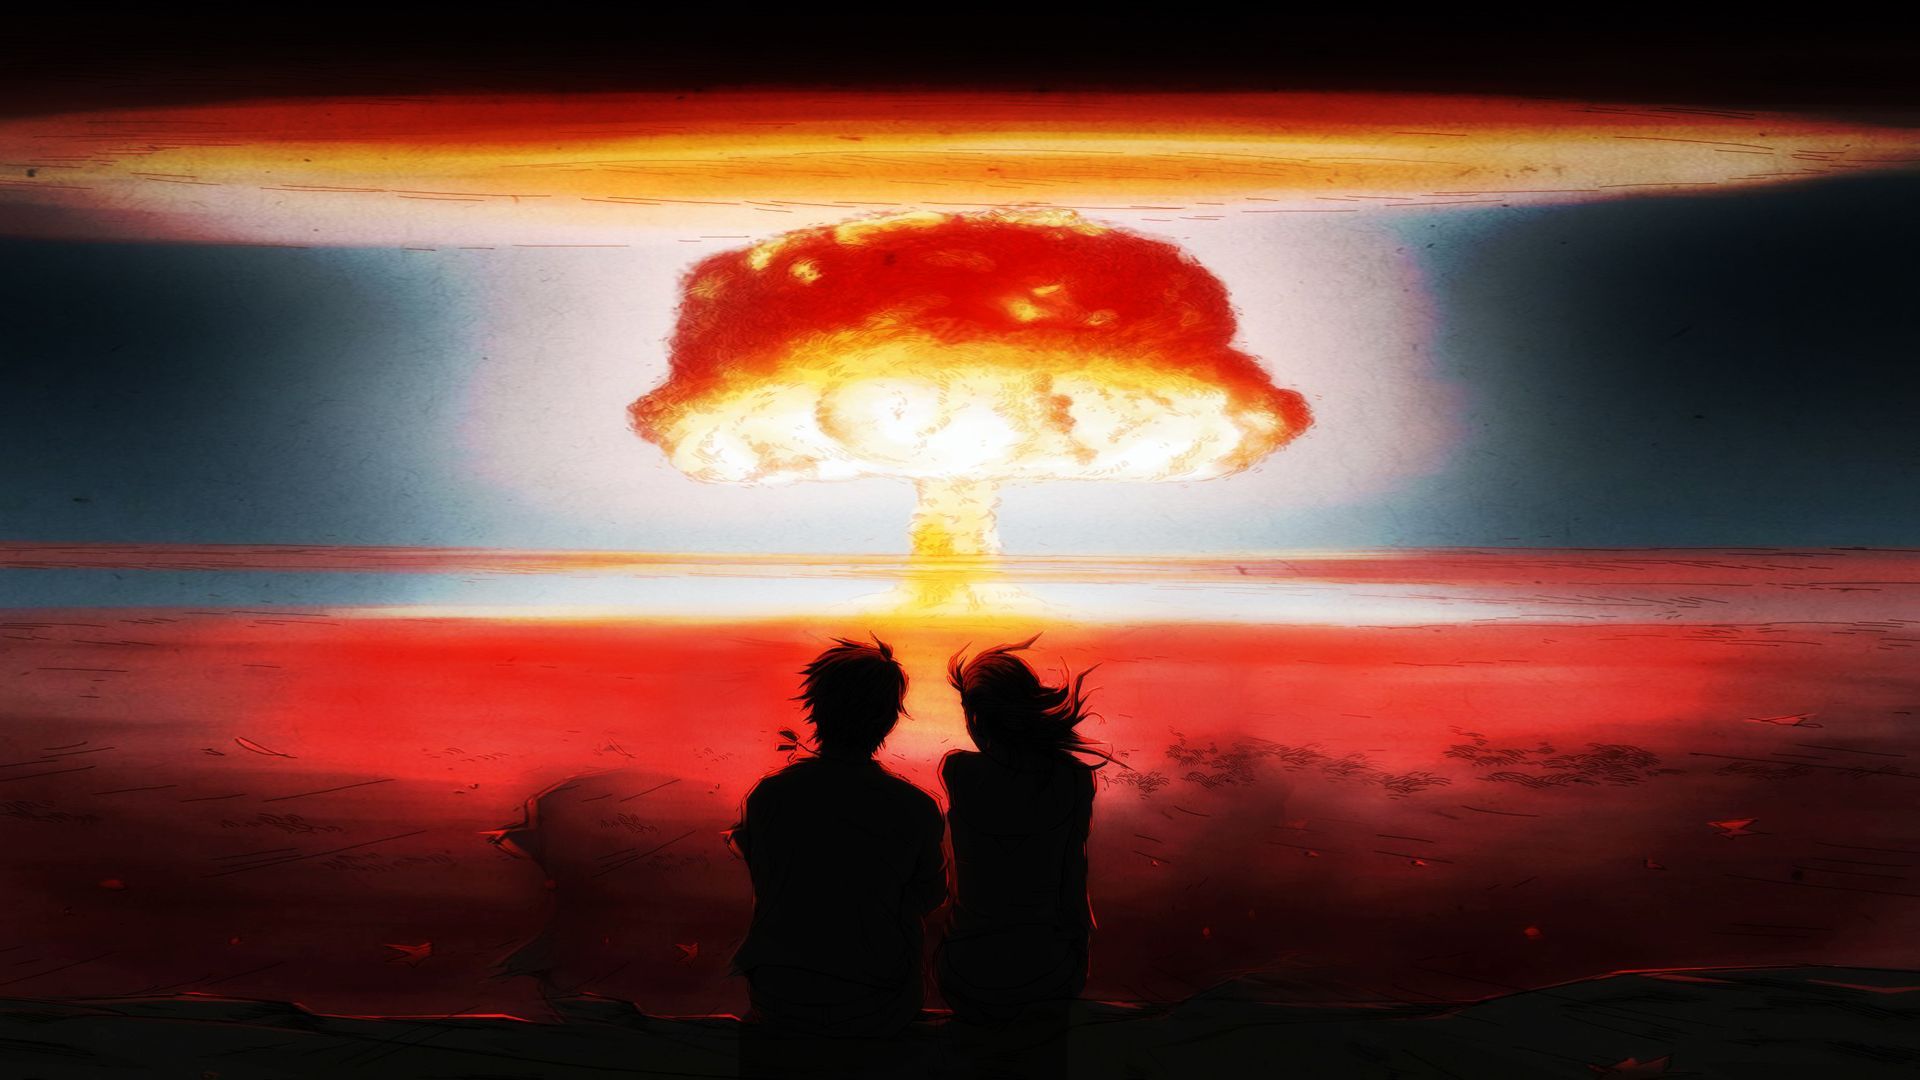 Watching a nuclear explosion wallpaper   1206262